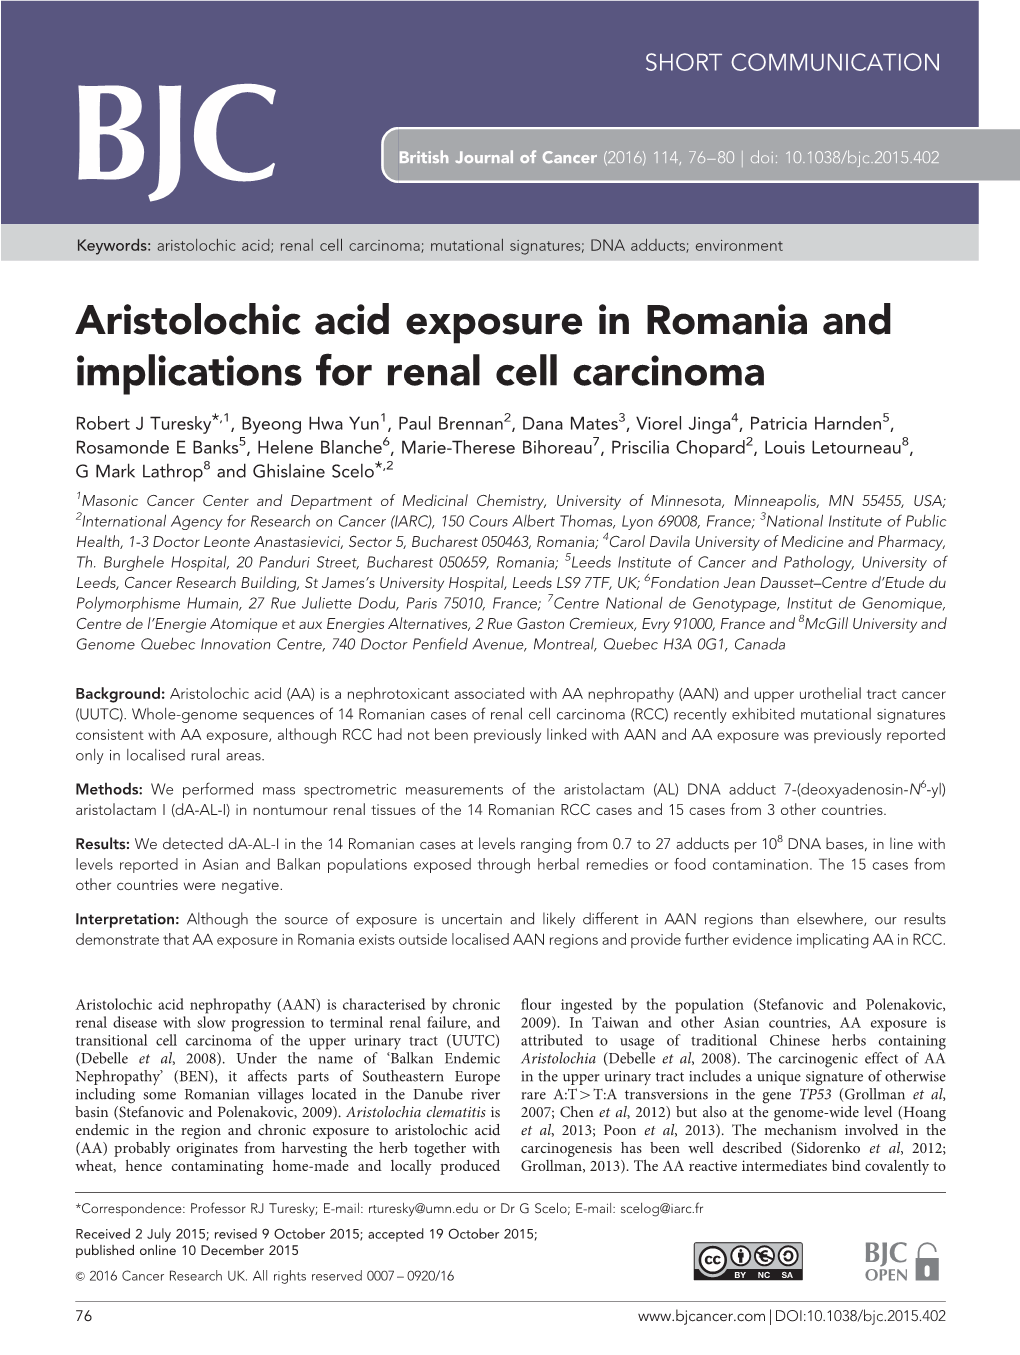 Aristolochic Acid Exposure in Romania and Implications for Renal Cell Carcinoma